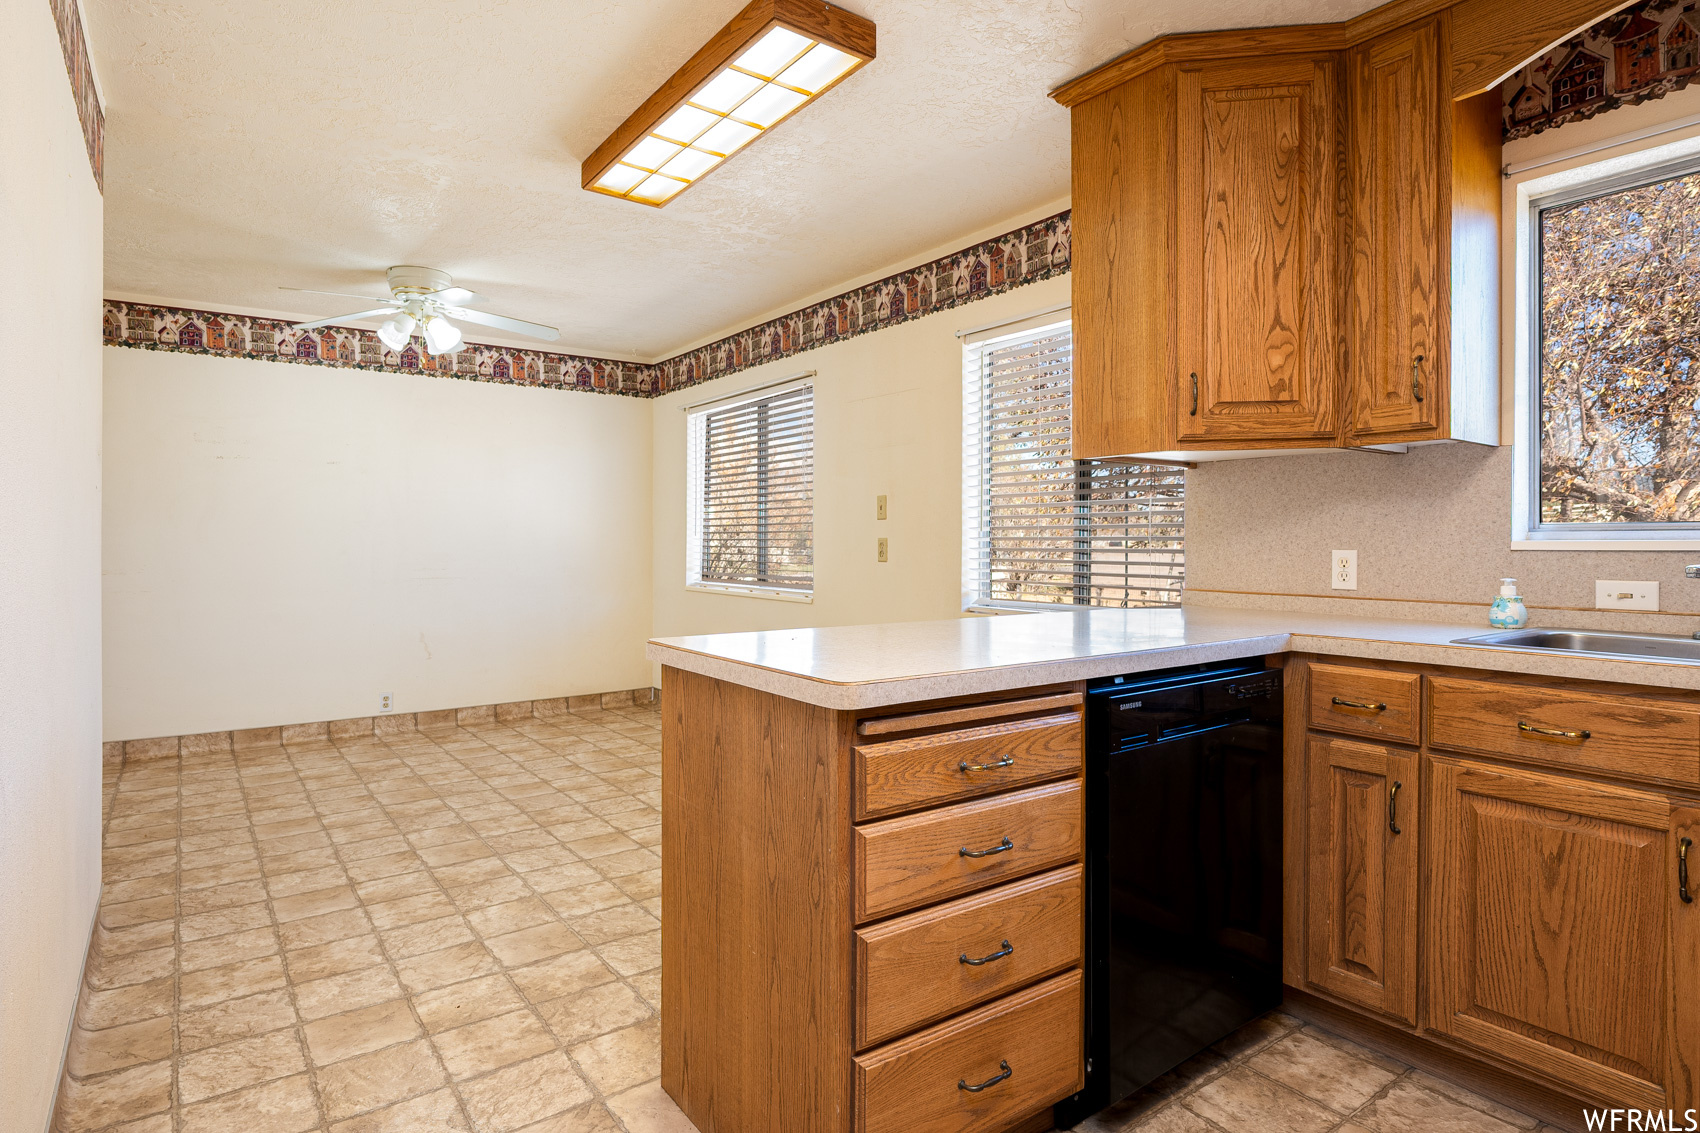 Kitchen with ceiling fan, kitchen peninsula, black dishwasher, and light tile floors